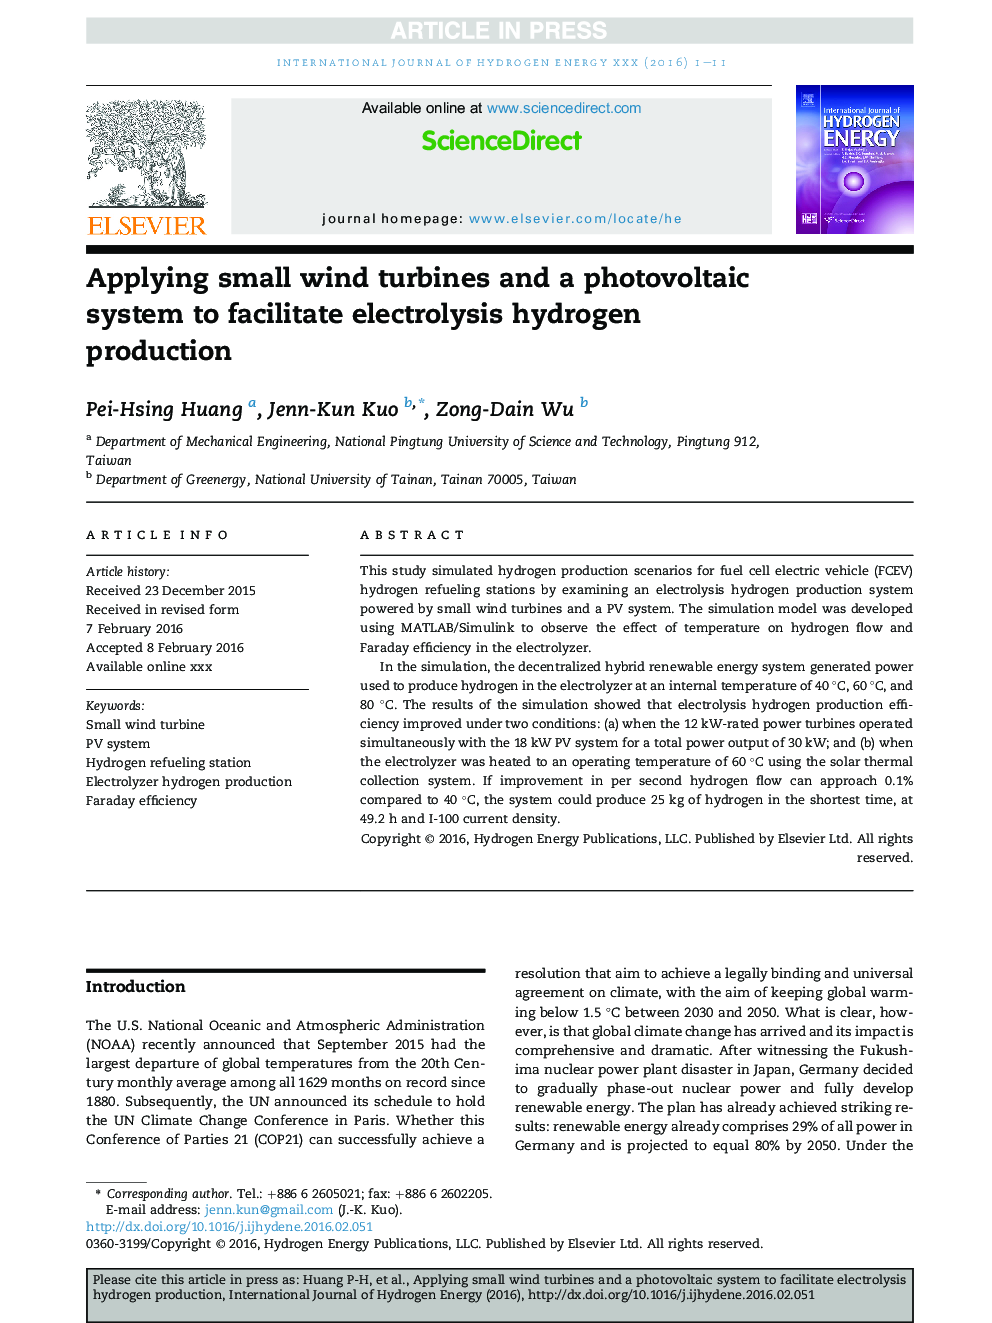 Applying small wind turbines and a photovoltaic system to facilitate electrolysis hydrogen production